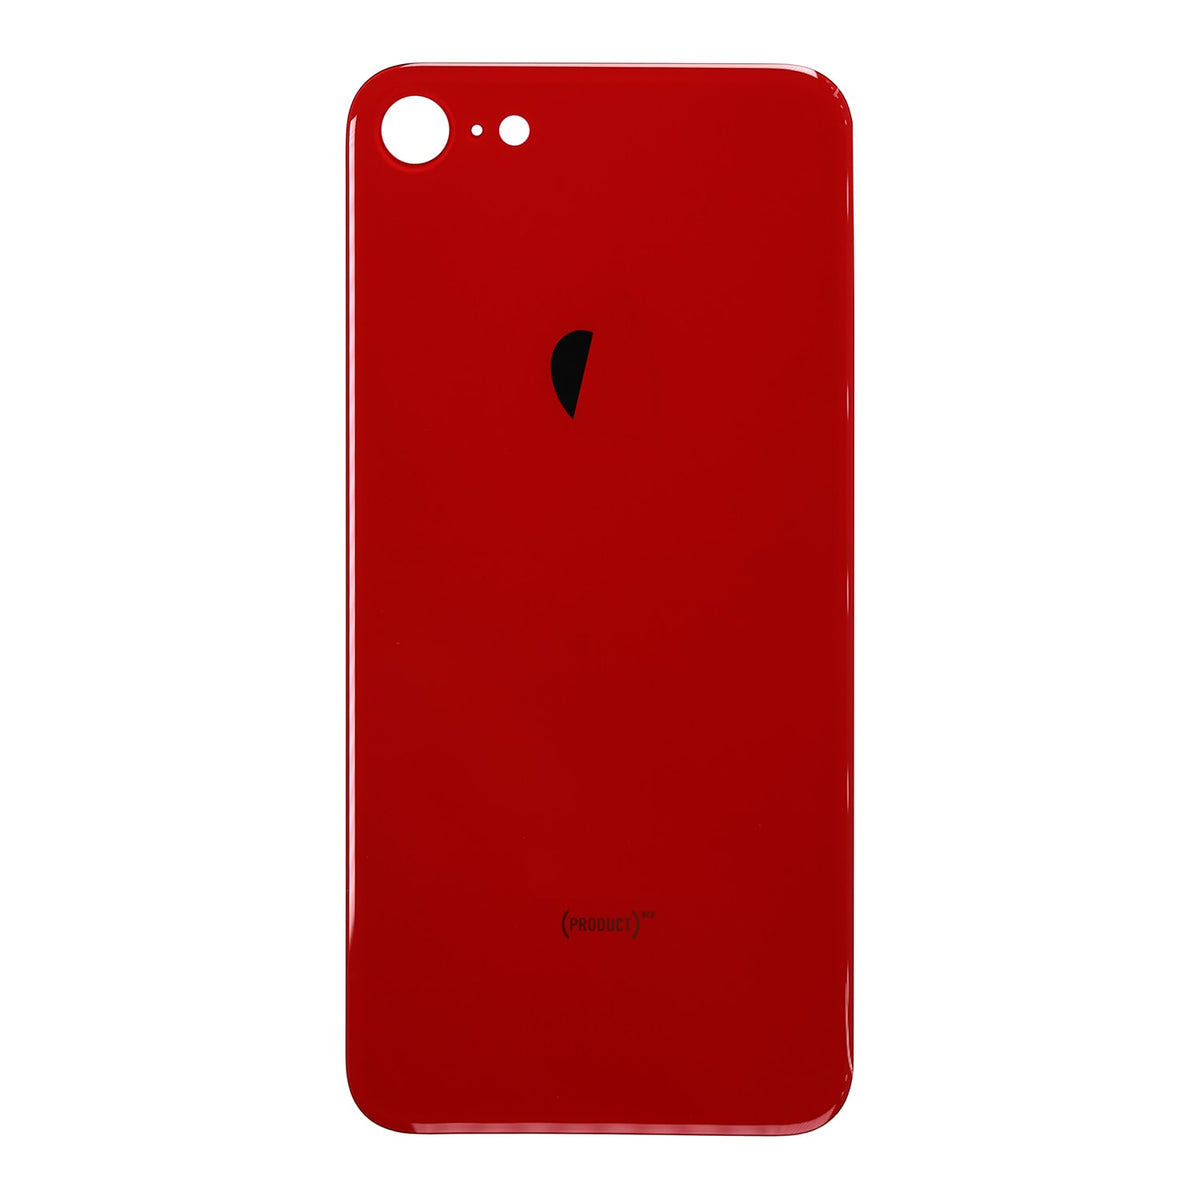 RED BACK COVER FOR IPHONE 8